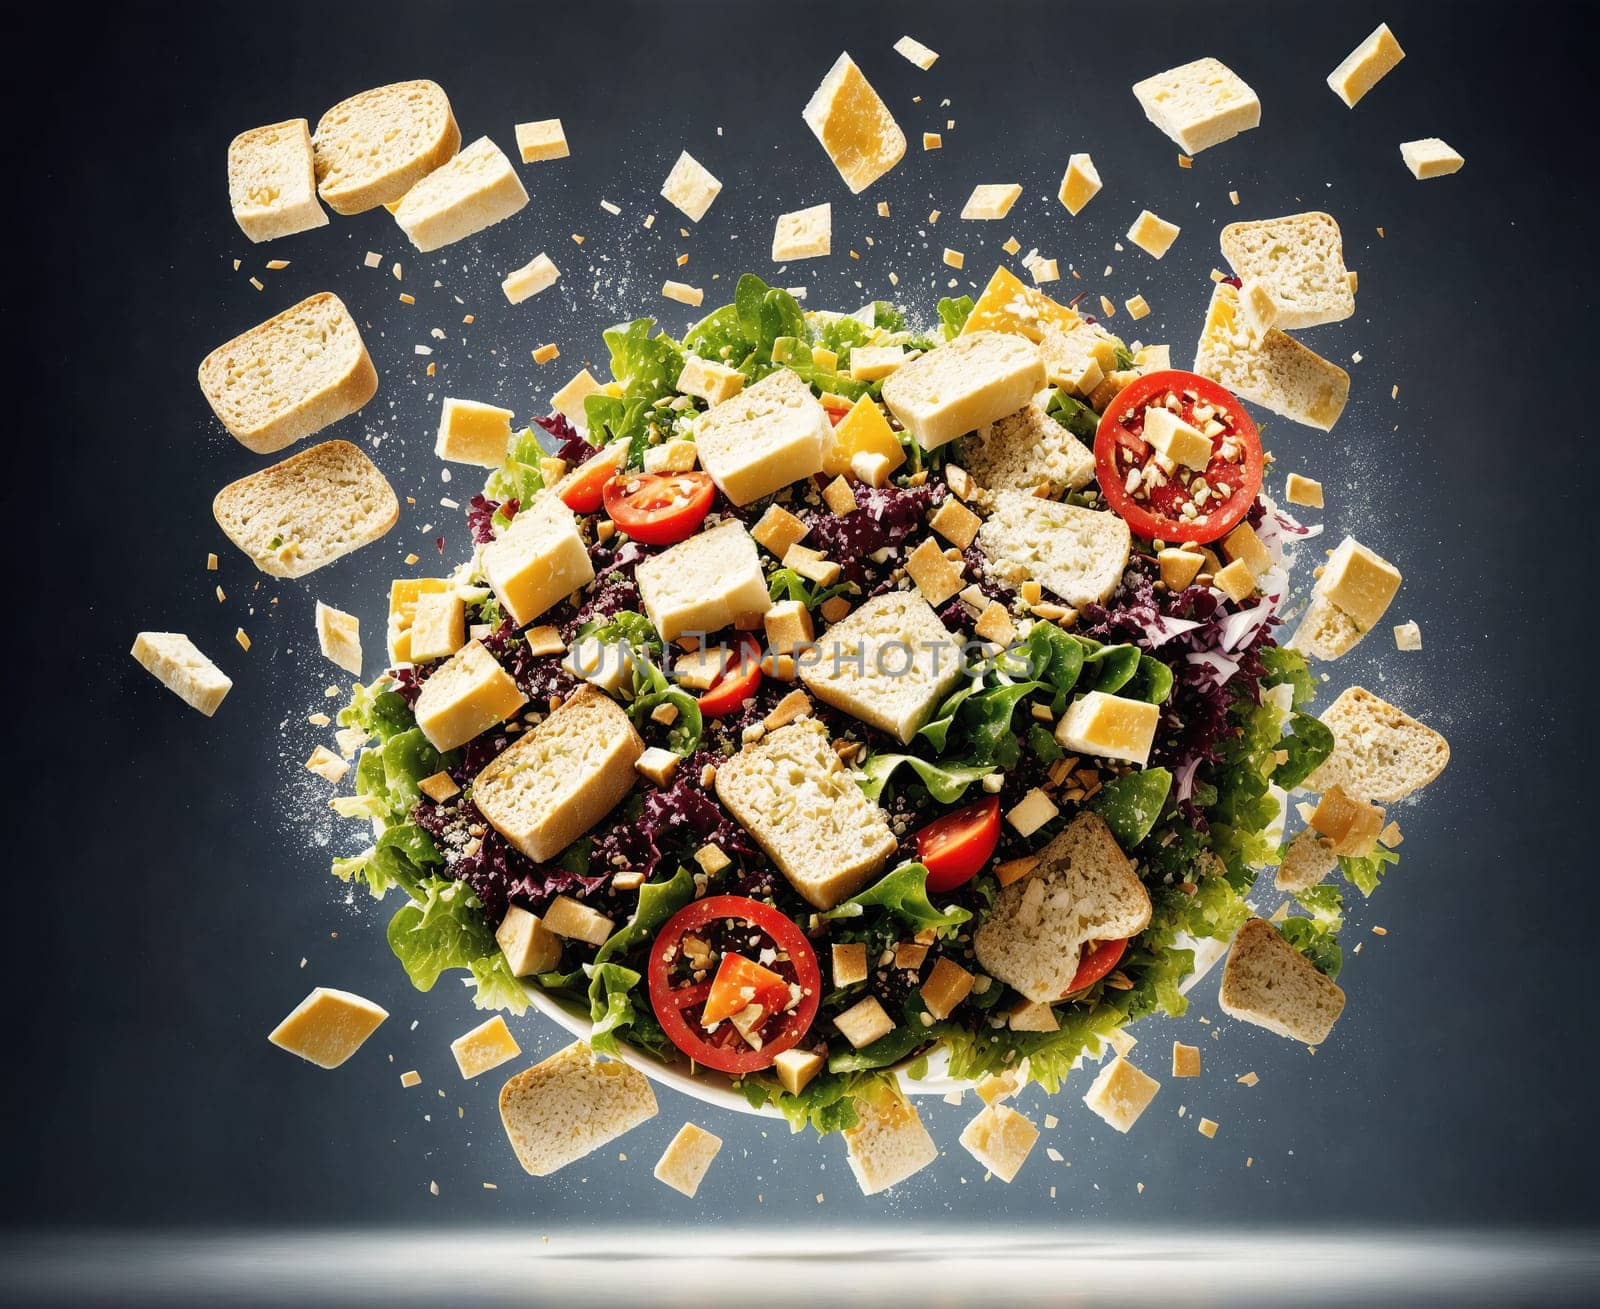 A salad made up of various ingredients such as cheese, lettuce, tomatoes, and other vegetables. by creart